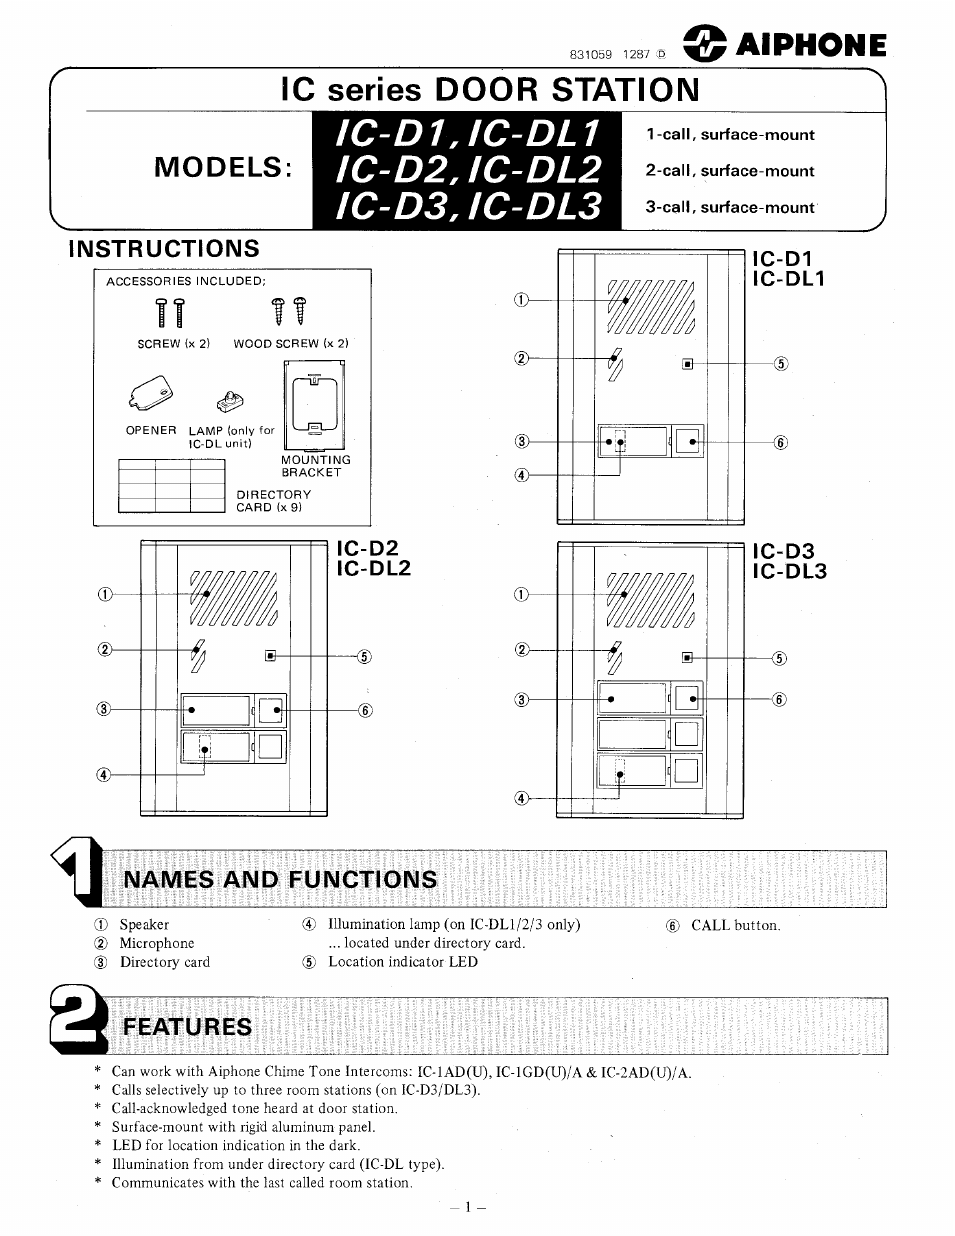 DOOR STATION IC-D2 (Page 1)